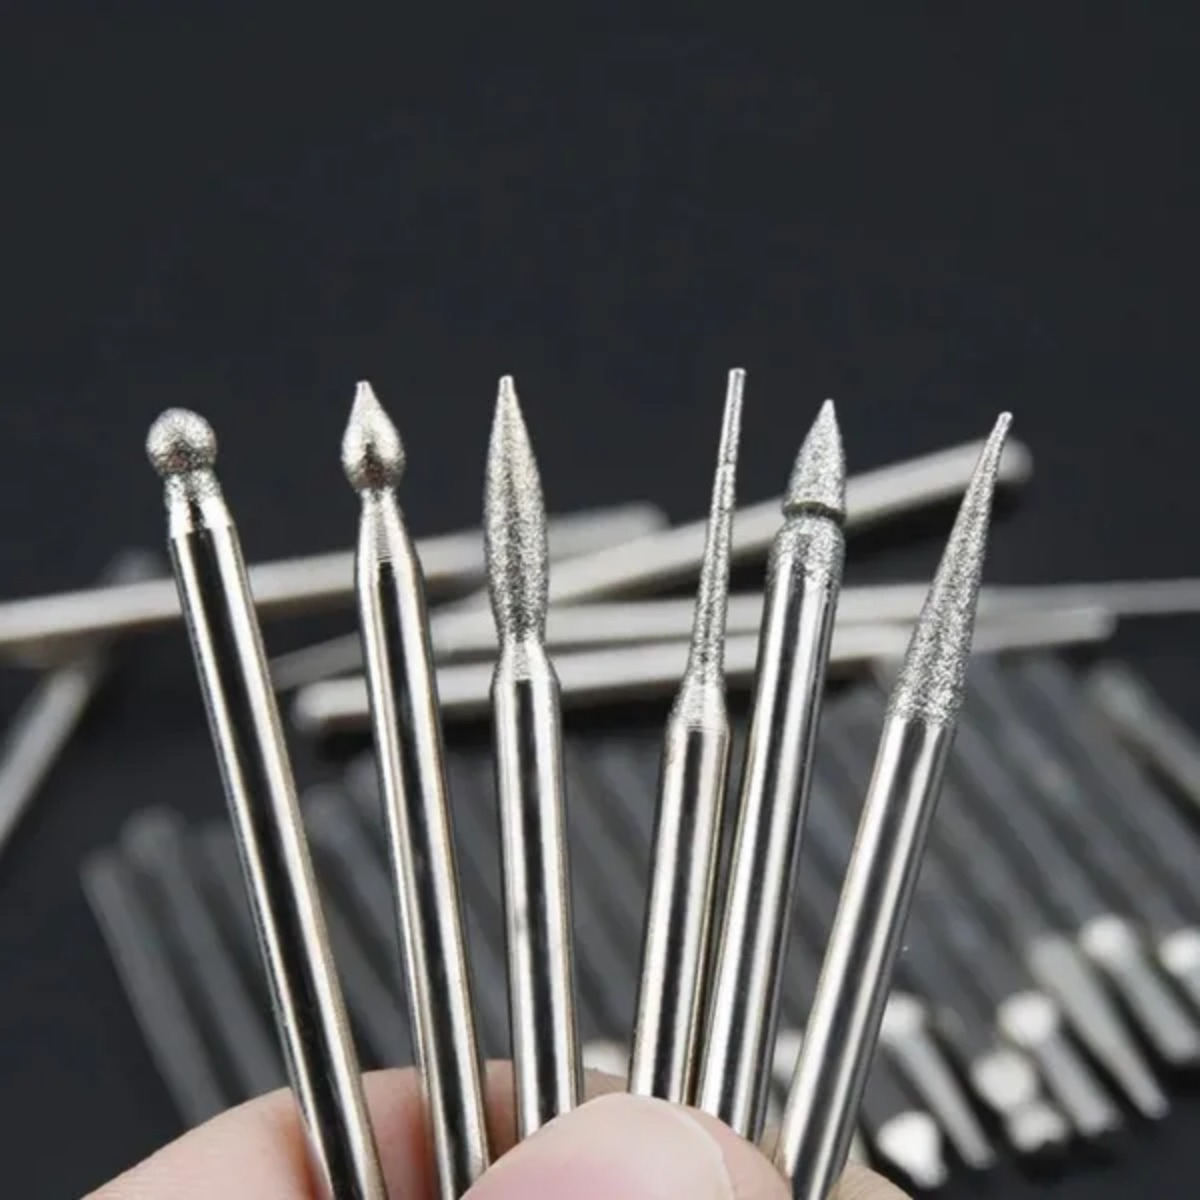 Stone Carving Set Diamond Burr Bits, 20pcs Polishing Kits Rotary Tools Accessories with 1/8' Shank for Carving, Engraving, Grinding, Polishing Stone